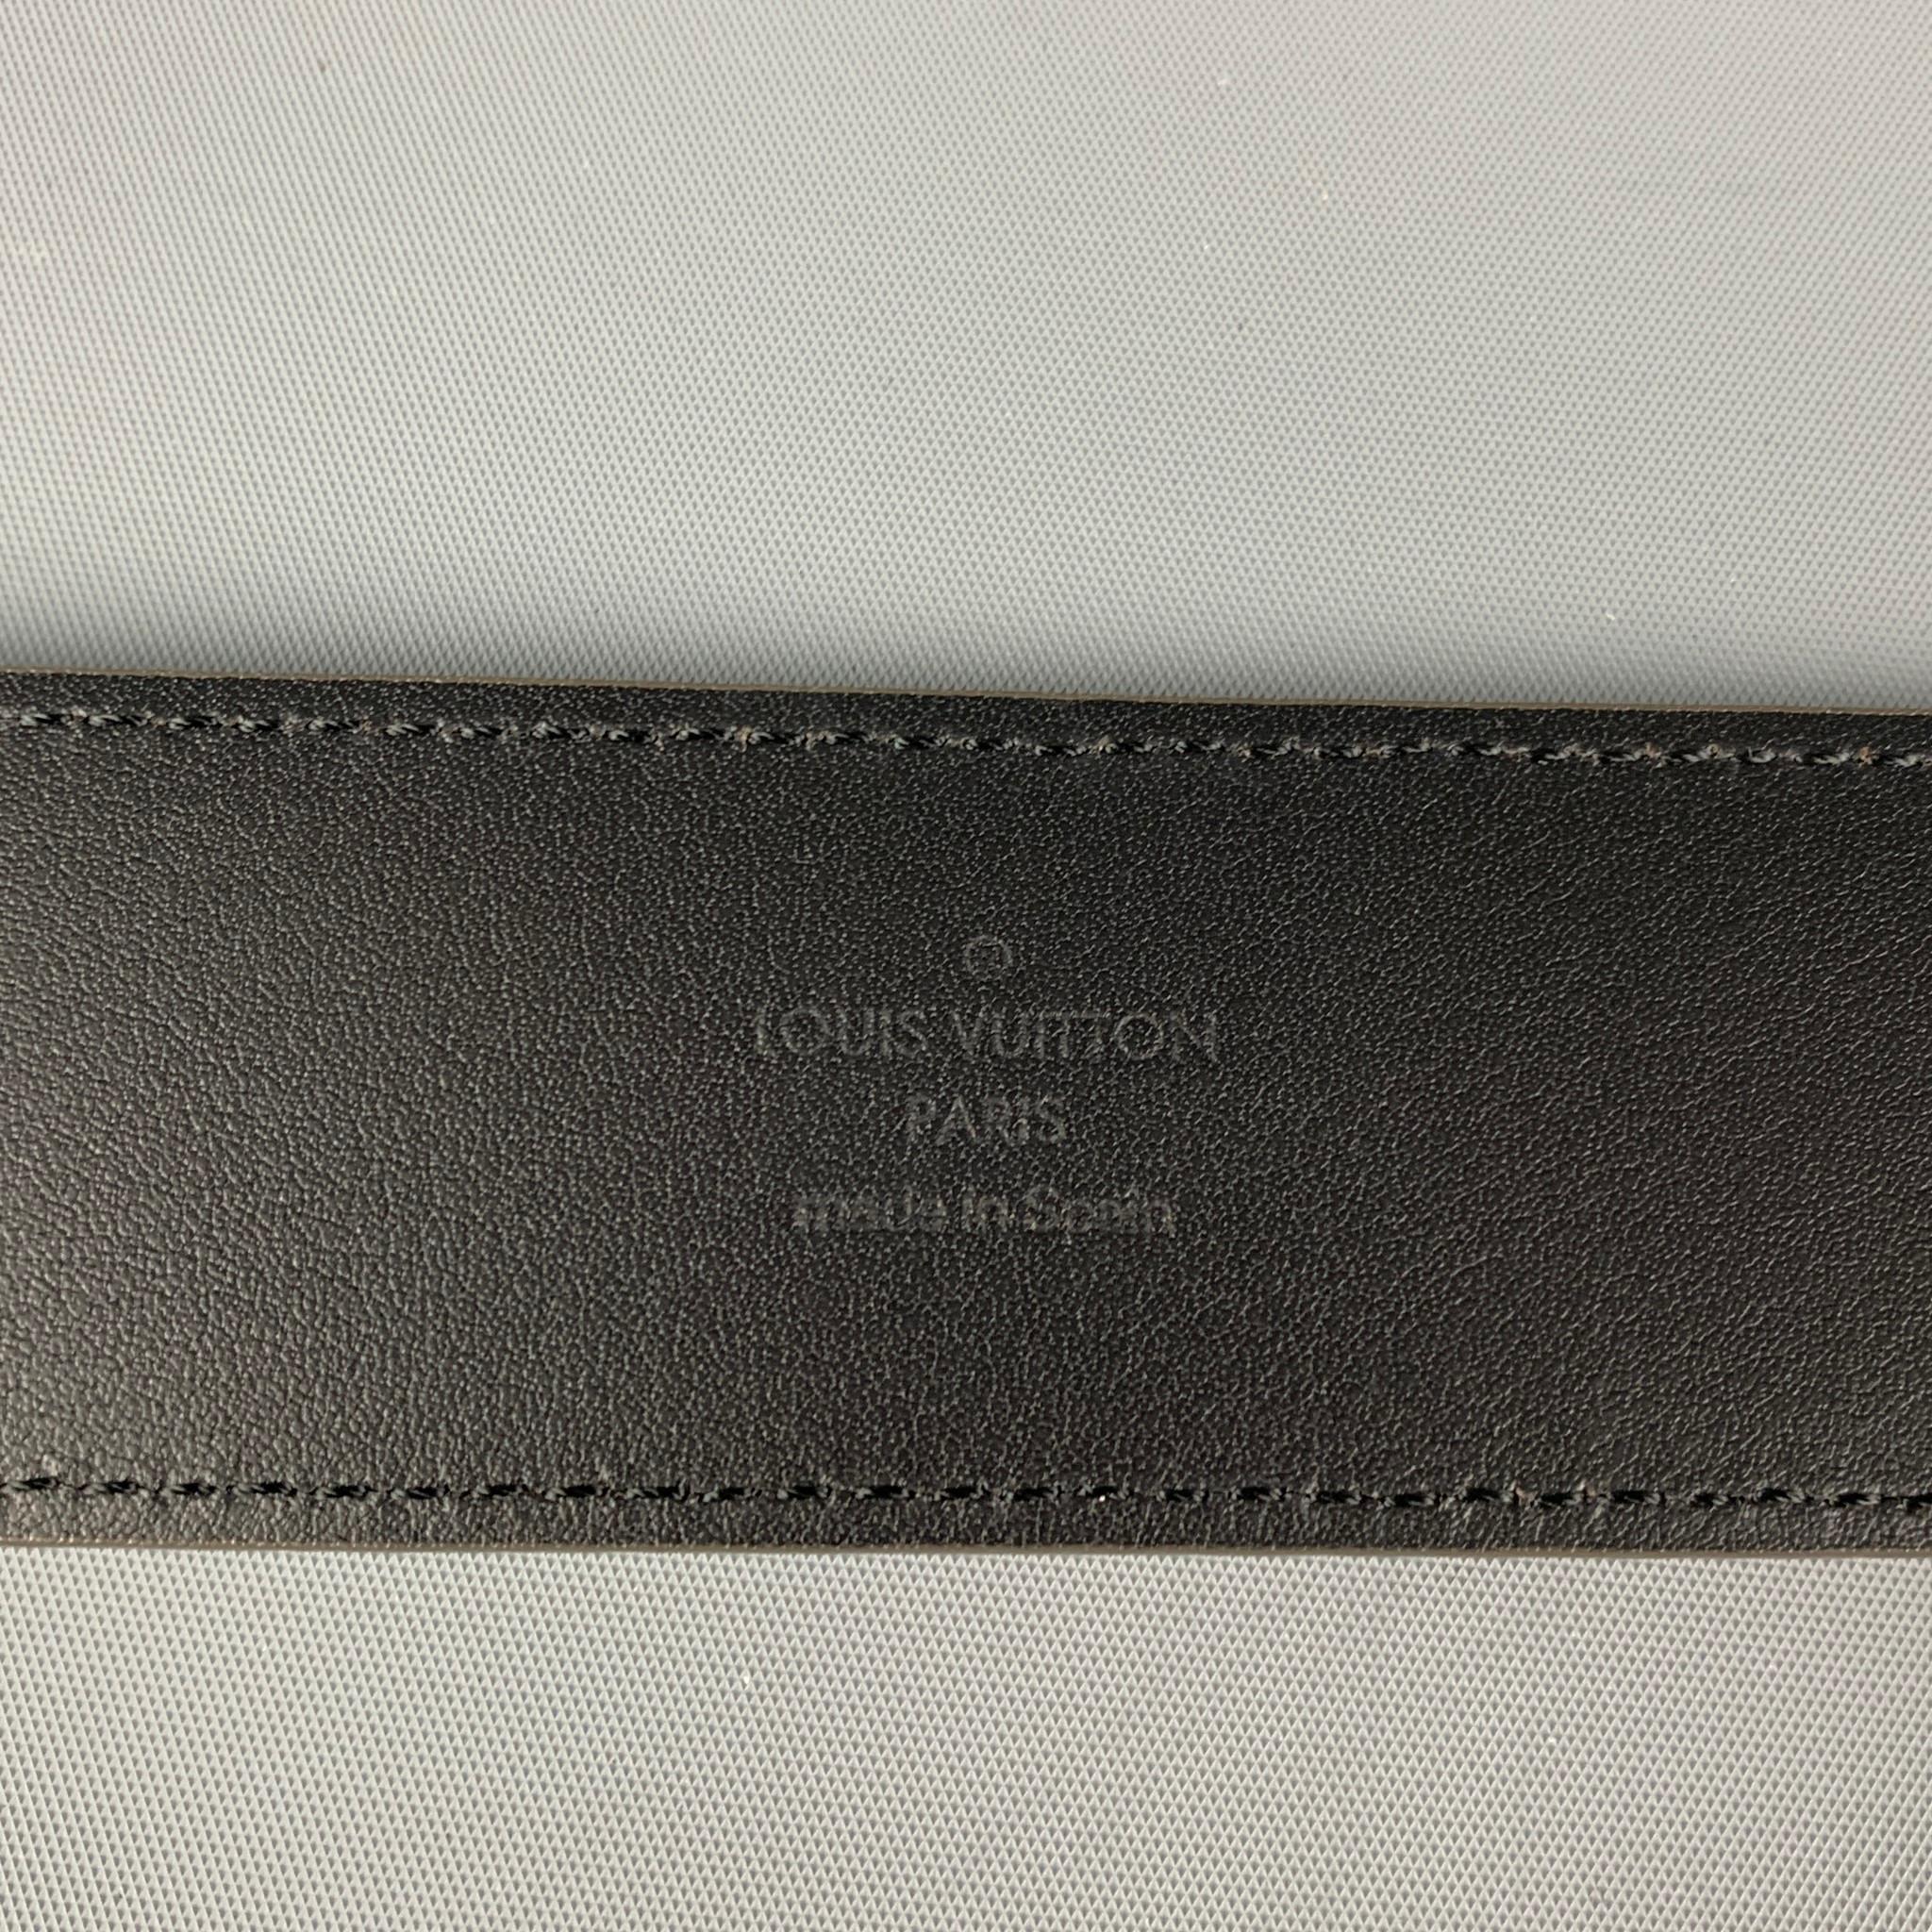 Black LOUIS VUITTON Size 34 Taupe Checkered Leather Belt